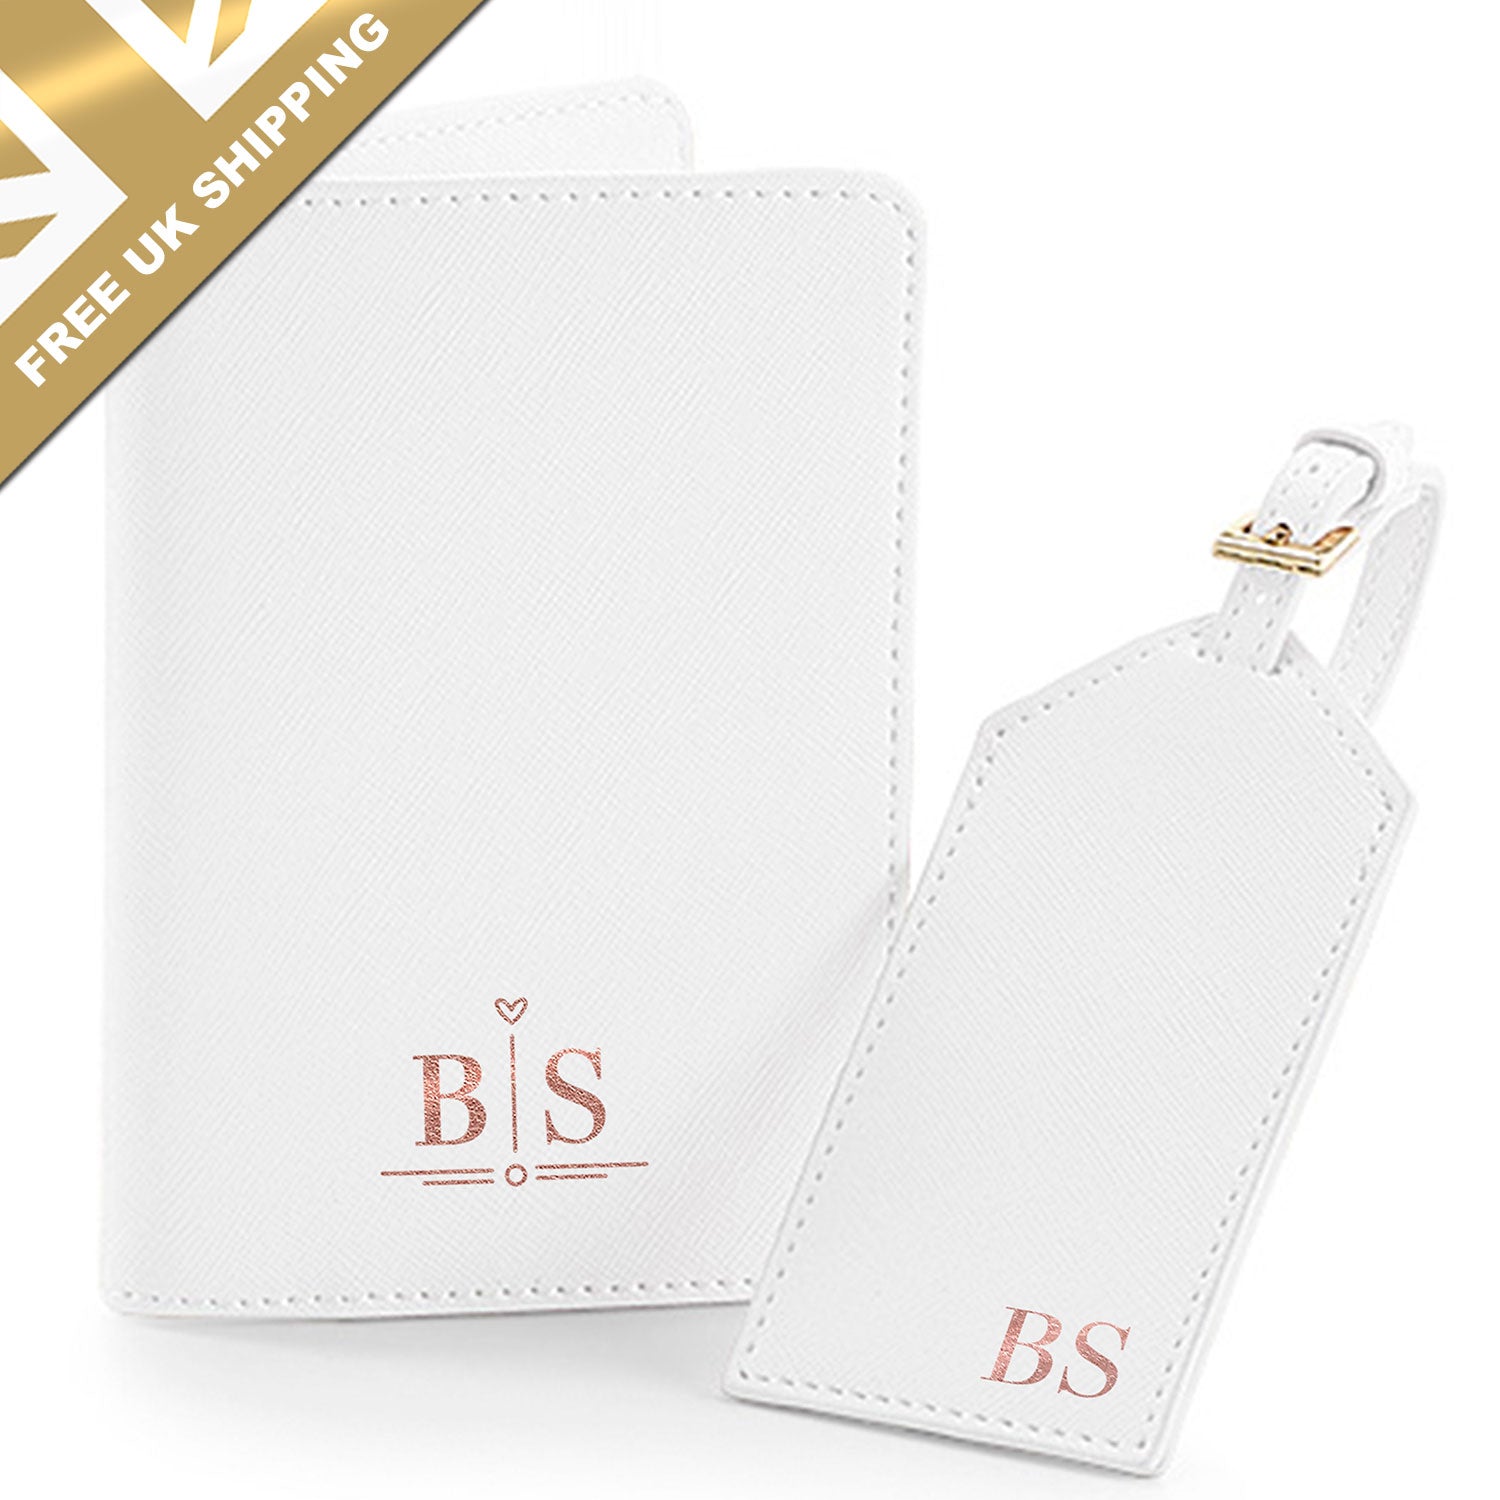 PERSONALISED PASSPORT AND LUGGAGE TAGS